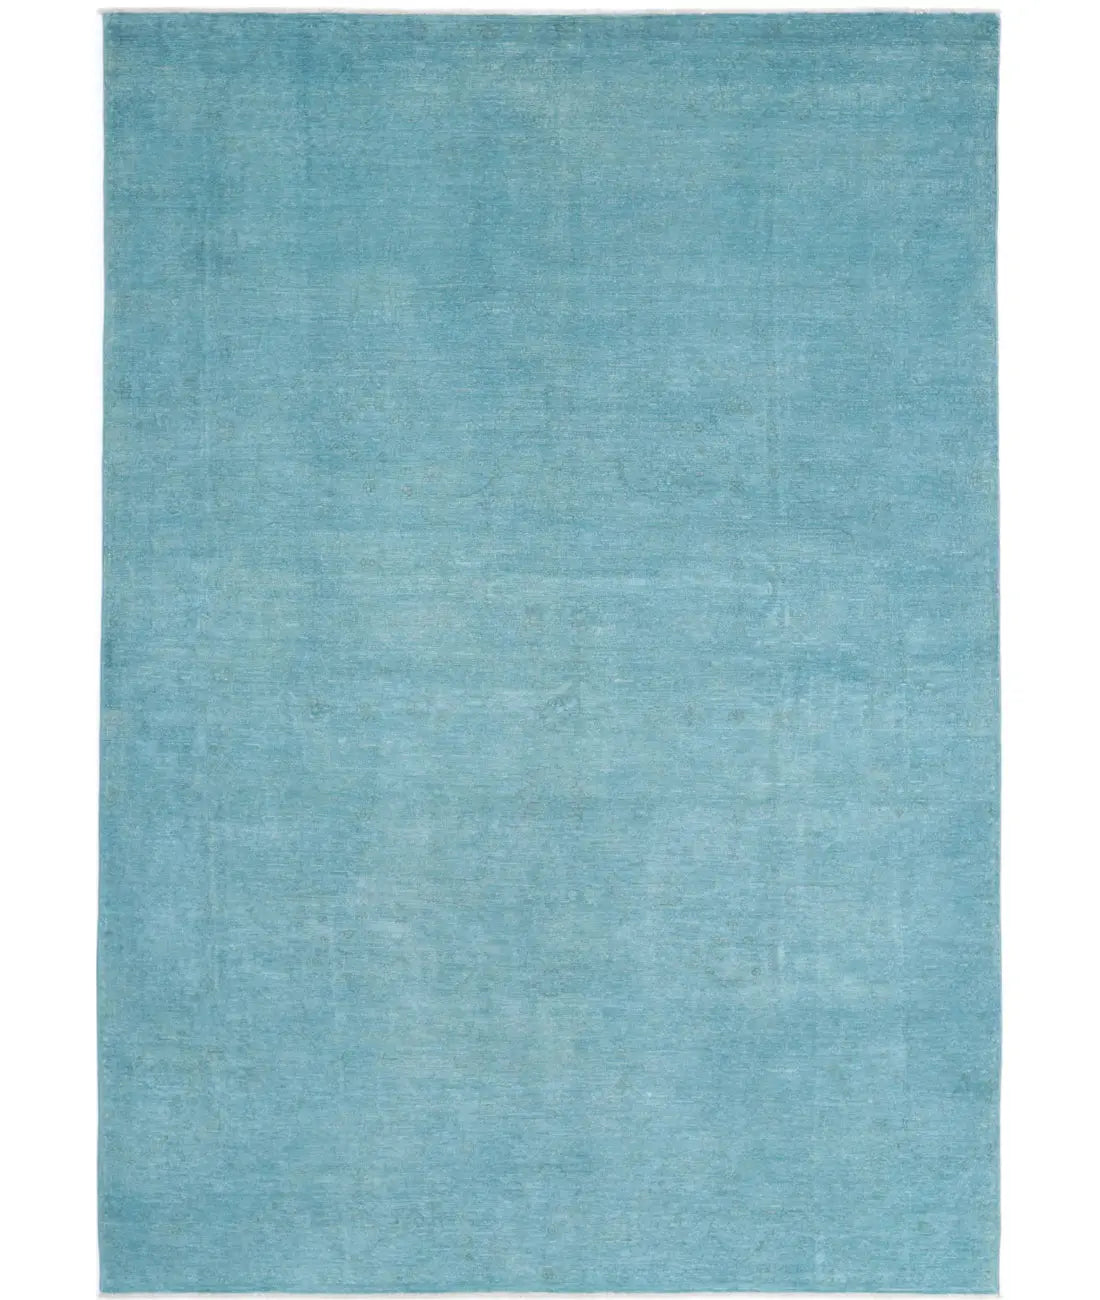 Hand Knotted Overdye Wool Rug - 6'9'' x 9'9''